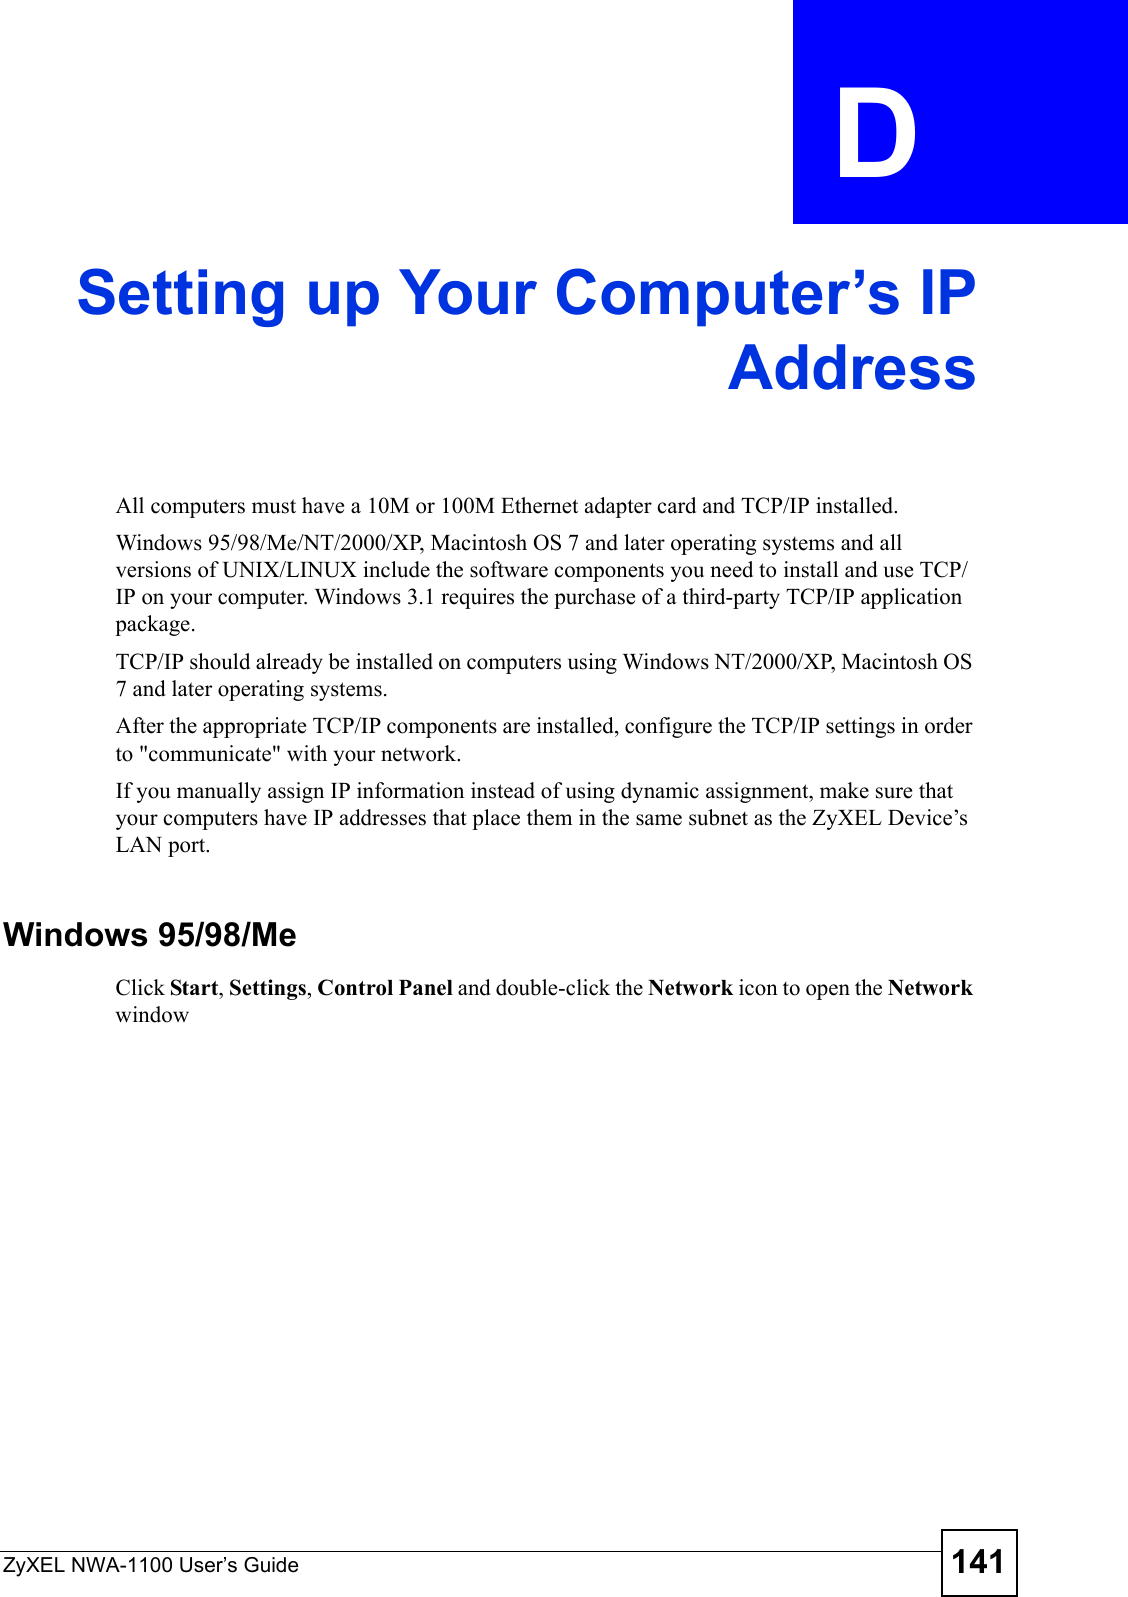 ZyXEL NWA-1100 User’s Guide 141APPENDIX  D Setting up Your Computer’s IPAddressAll computers must have a 10M or 100M Ethernet adapter card and TCP/IP installed. Windows 95/98/Me/NT/2000/XP, Macintosh OS 7 and later operating systems and all versions of UNIX/LINUX include the software components you need to install and use TCP/IP on your computer. Windows 3.1 requires the purchase of a third-party TCP/IP application package.TCP/IP should already be installed on computers using Windows NT/2000/XP, Macintosh OS 7 and later operating systems.After the appropriate TCP/IP components are installed, configure the TCP/IP settings in order to &quot;communicate&quot; with your network. If you manually assign IP information instead of using dynamic assignment, make sure that your computers have IP addresses that place them in the same subnet as the ZyXEL Device’s LAN port.Windows 95/98/MeClick Start, Settings, Control Panel and double-click the Network icon to open the Network window